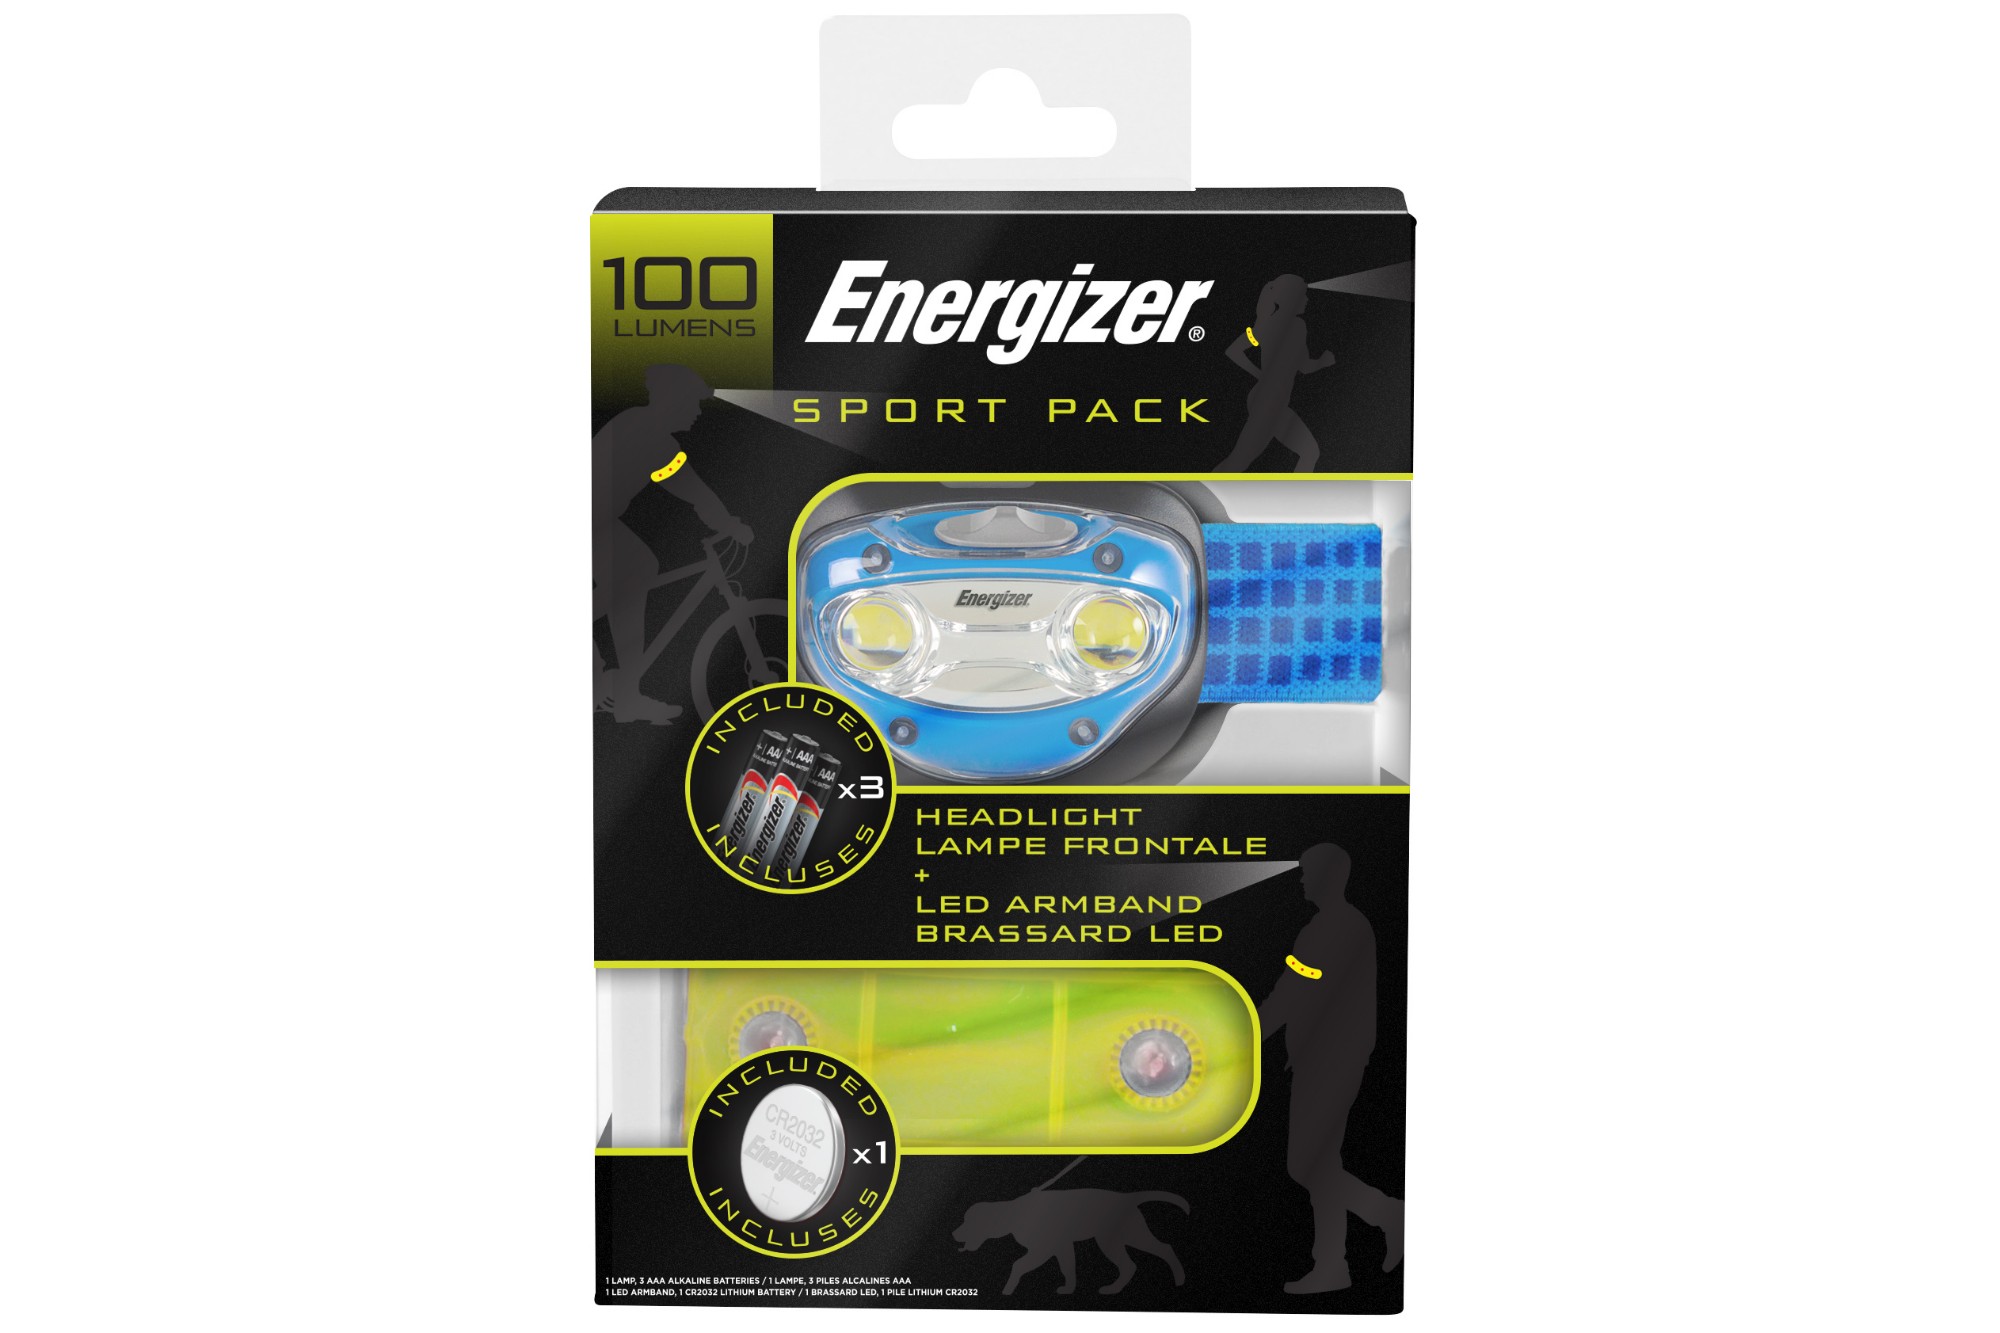 Photos - Other for Computer Energizer Sport Gift Pack - Head Torch and LED Armband ENERVISIONSPORT 